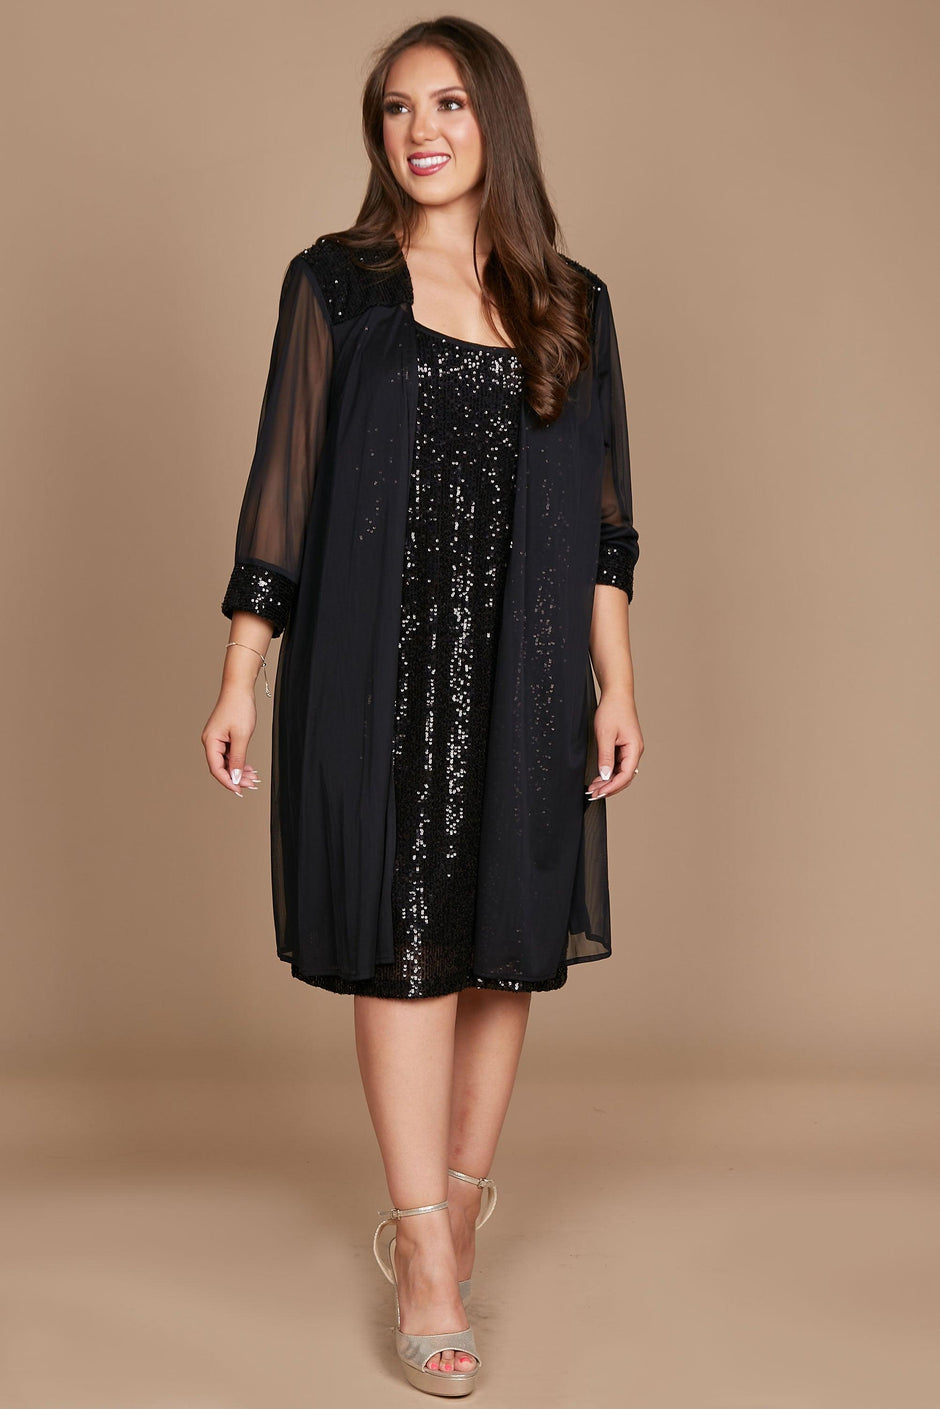 Grab Beautiful Mother of the Bride Dresses on Sale - The Dress Outlet